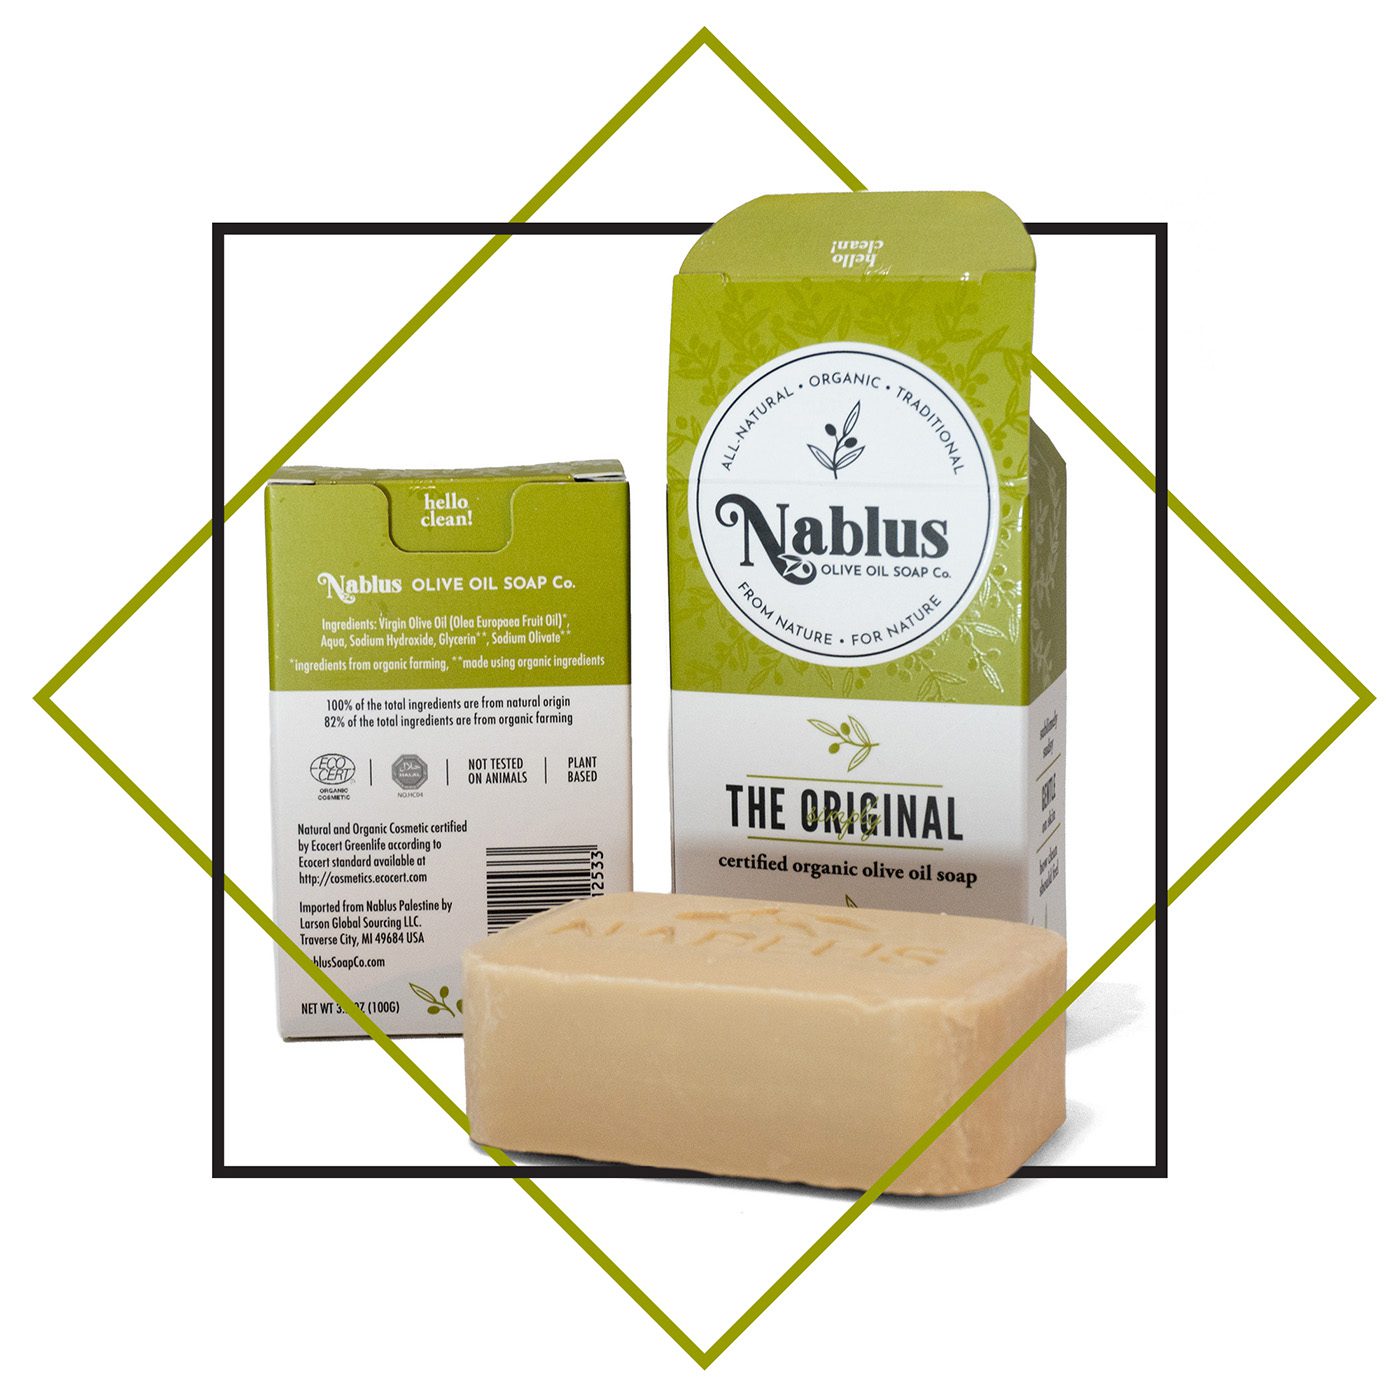 Brand Design and US Launch for Nablus Olive Oil Soap Co.